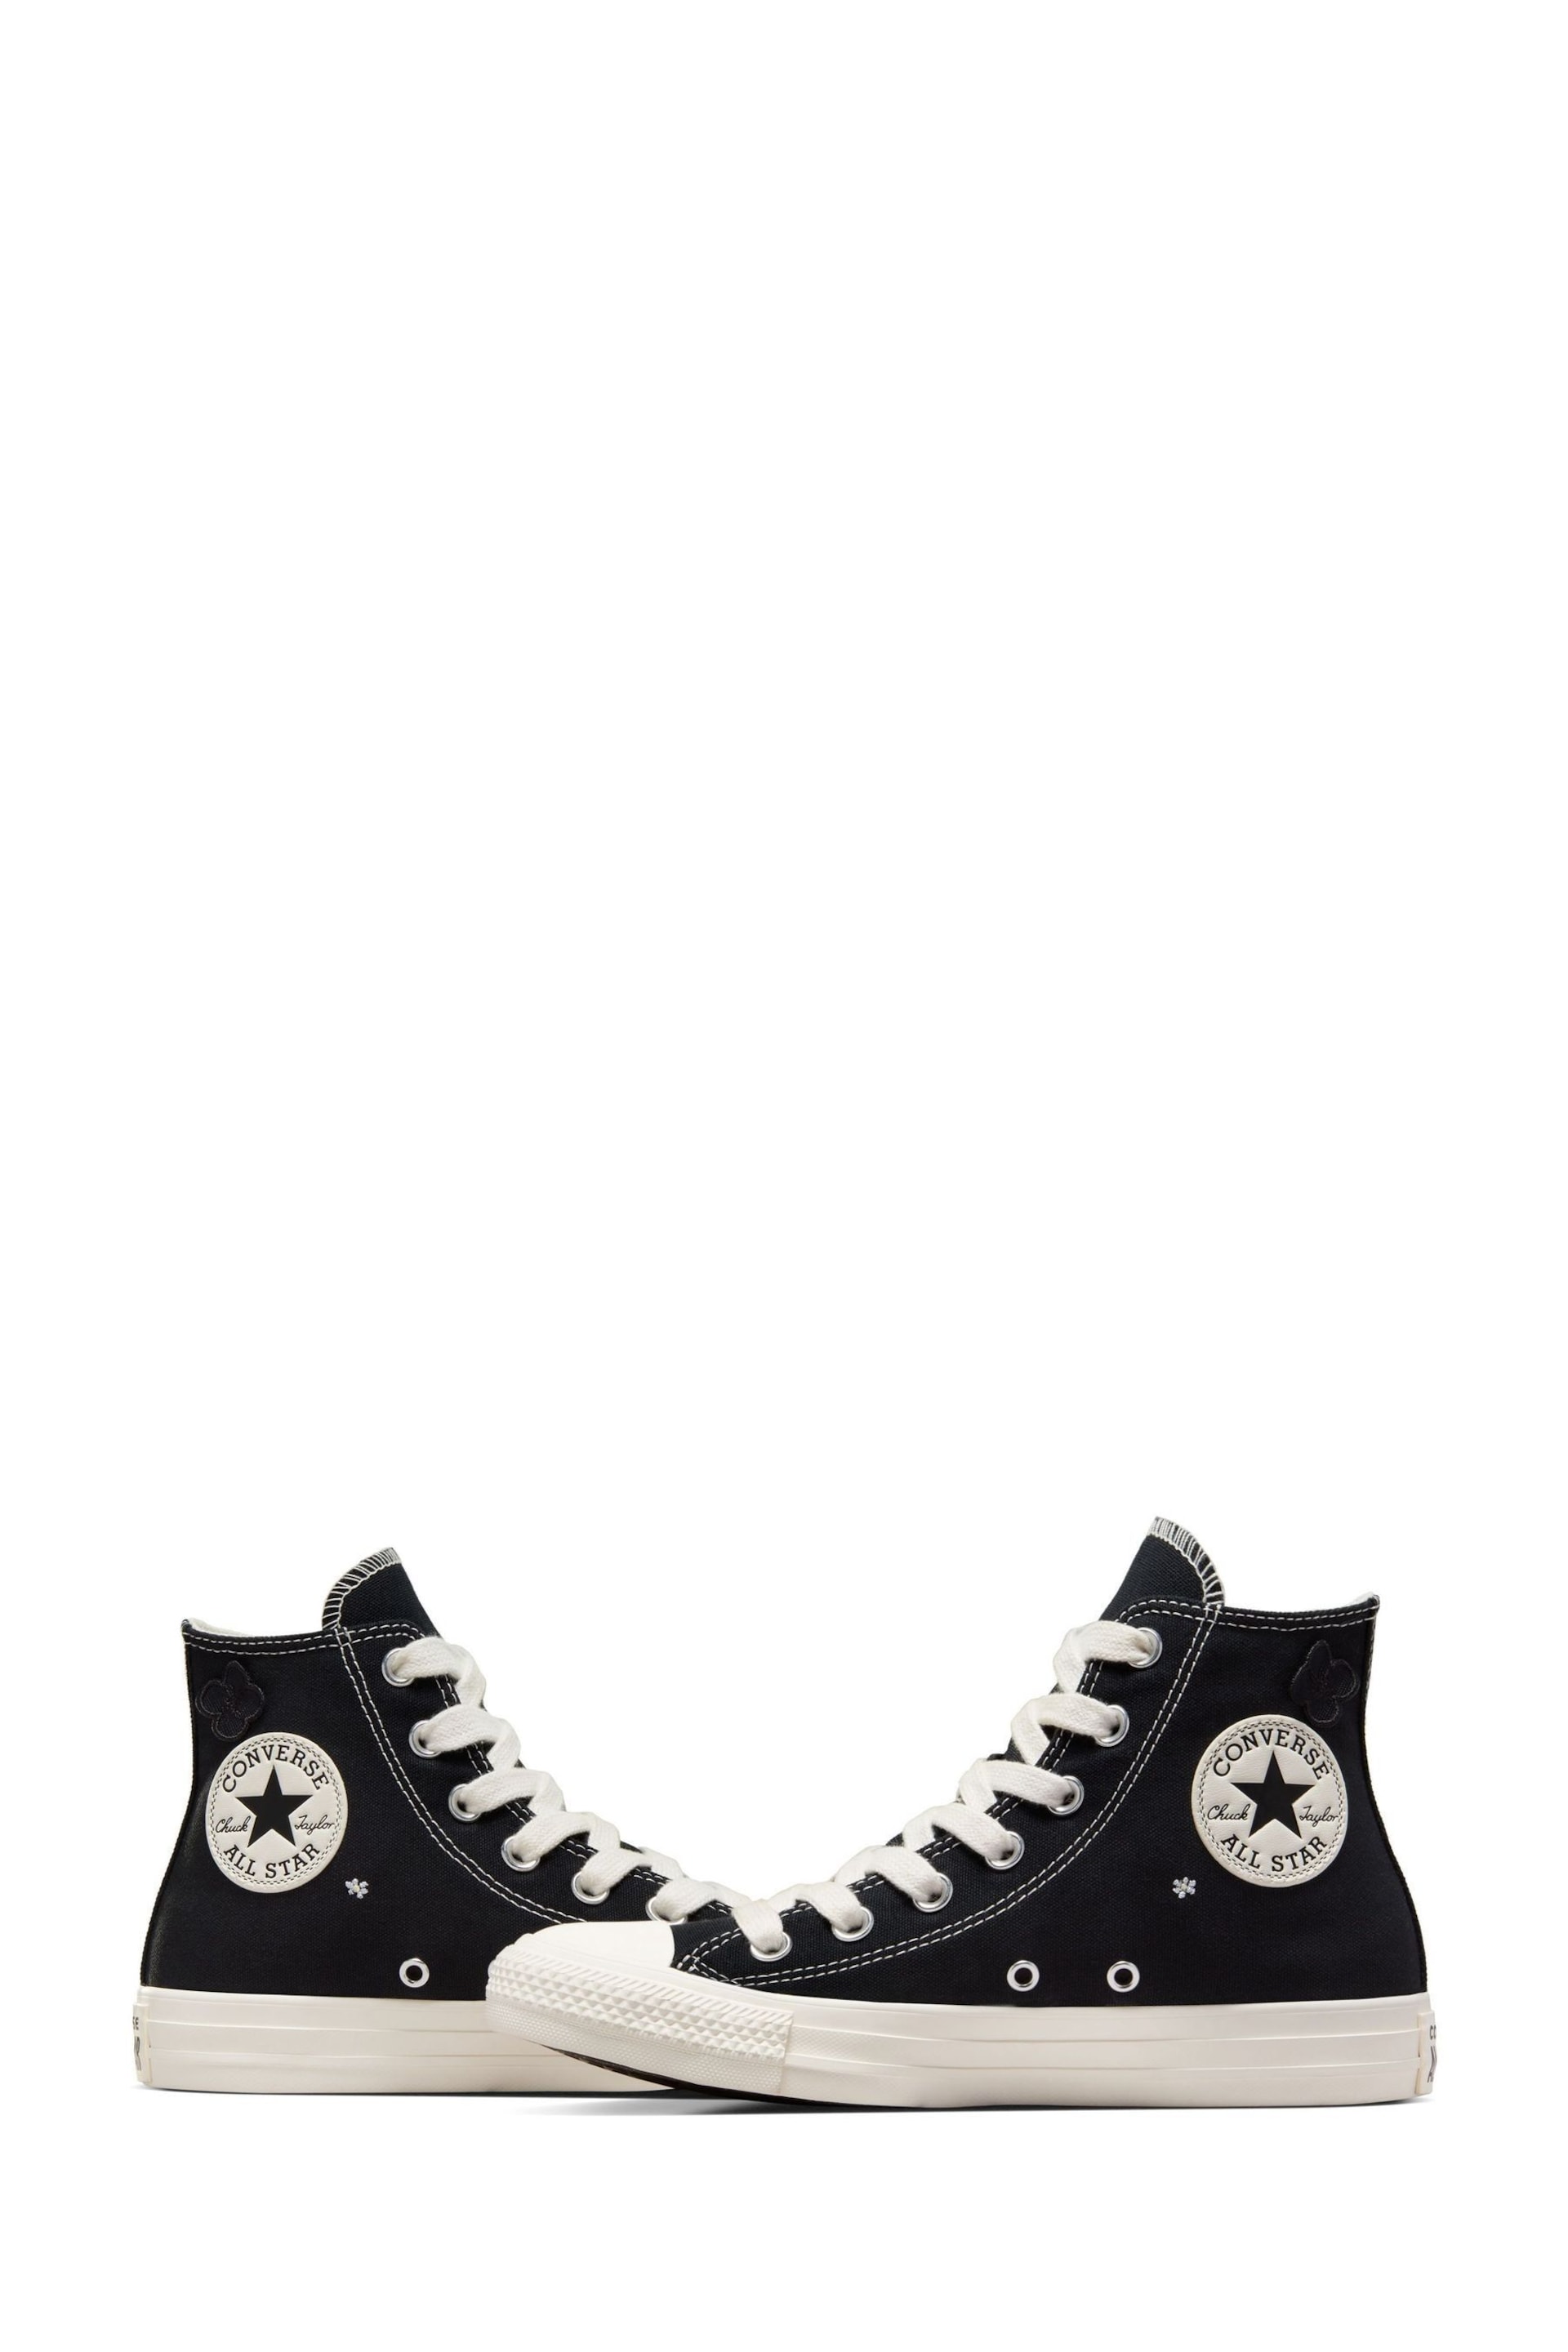 Converse Black Floral Embroidered High Top Trainers - Image 8 of 13